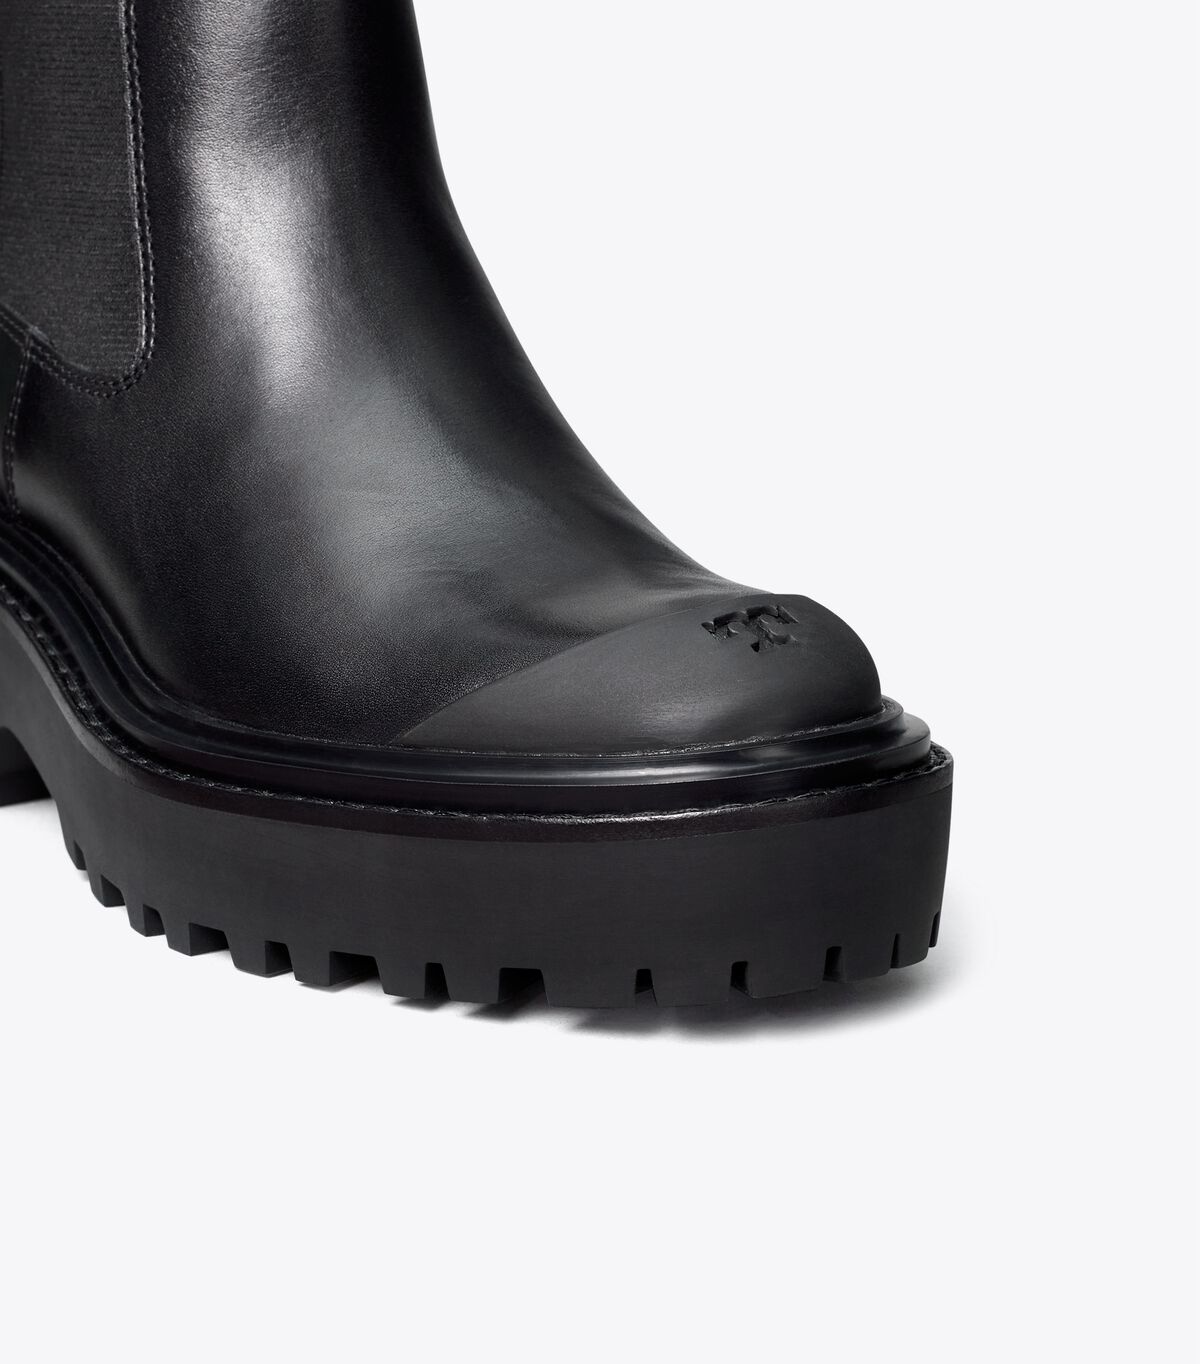 Chelsea Lug-Sole Ankle Boot